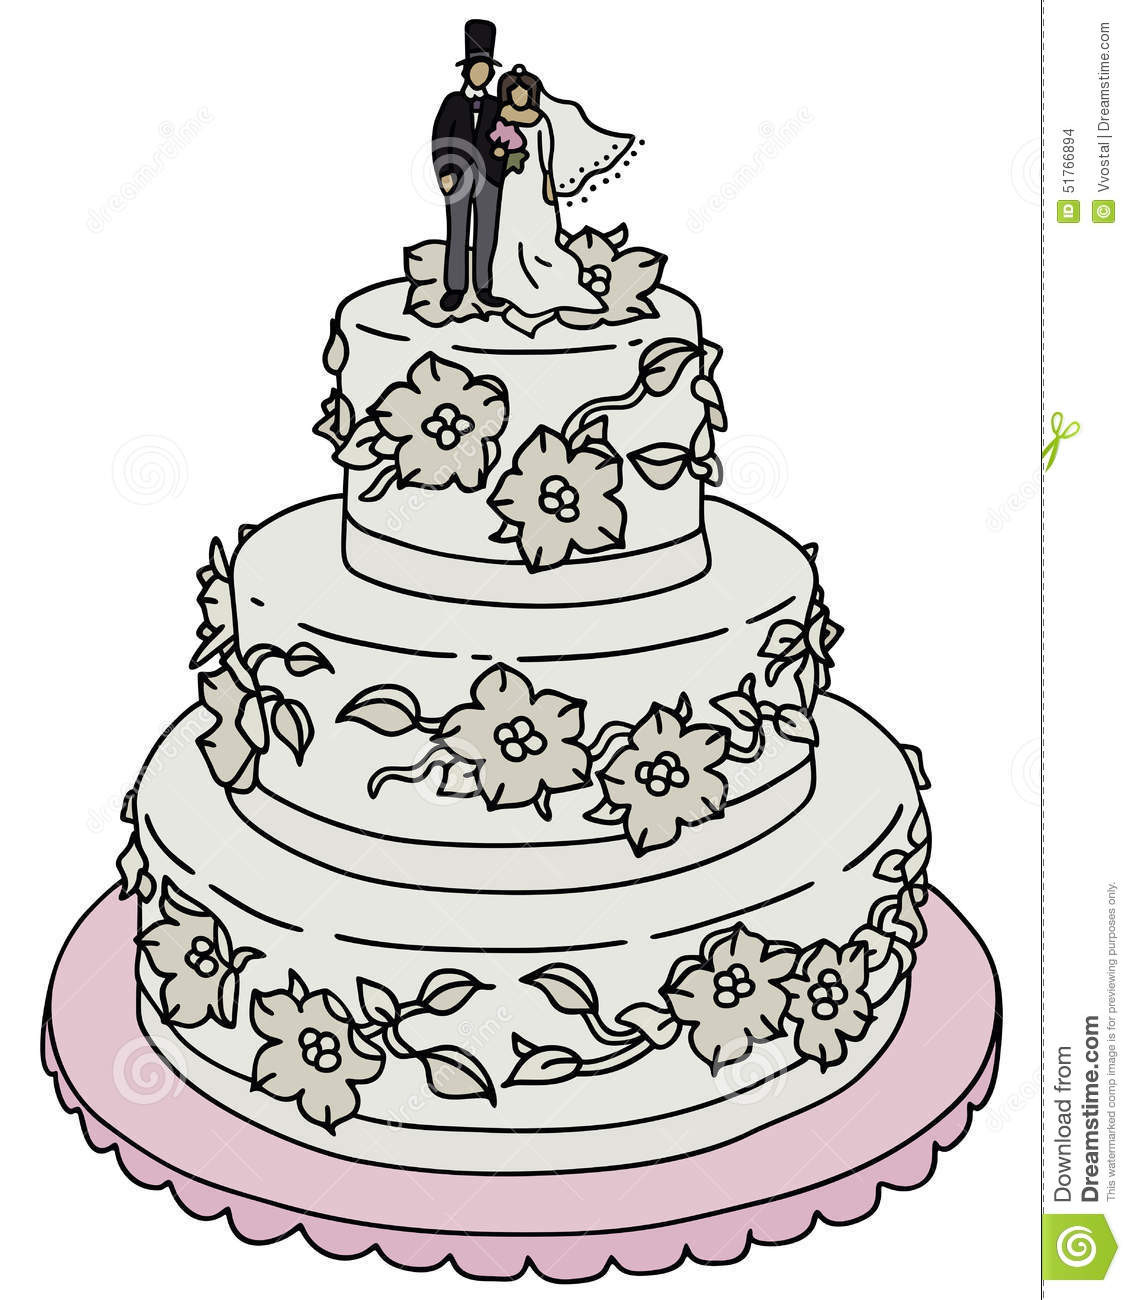 Wedding Cakes Drawings
 Drawn wedding cake Pencil and in color drawn wedding cake